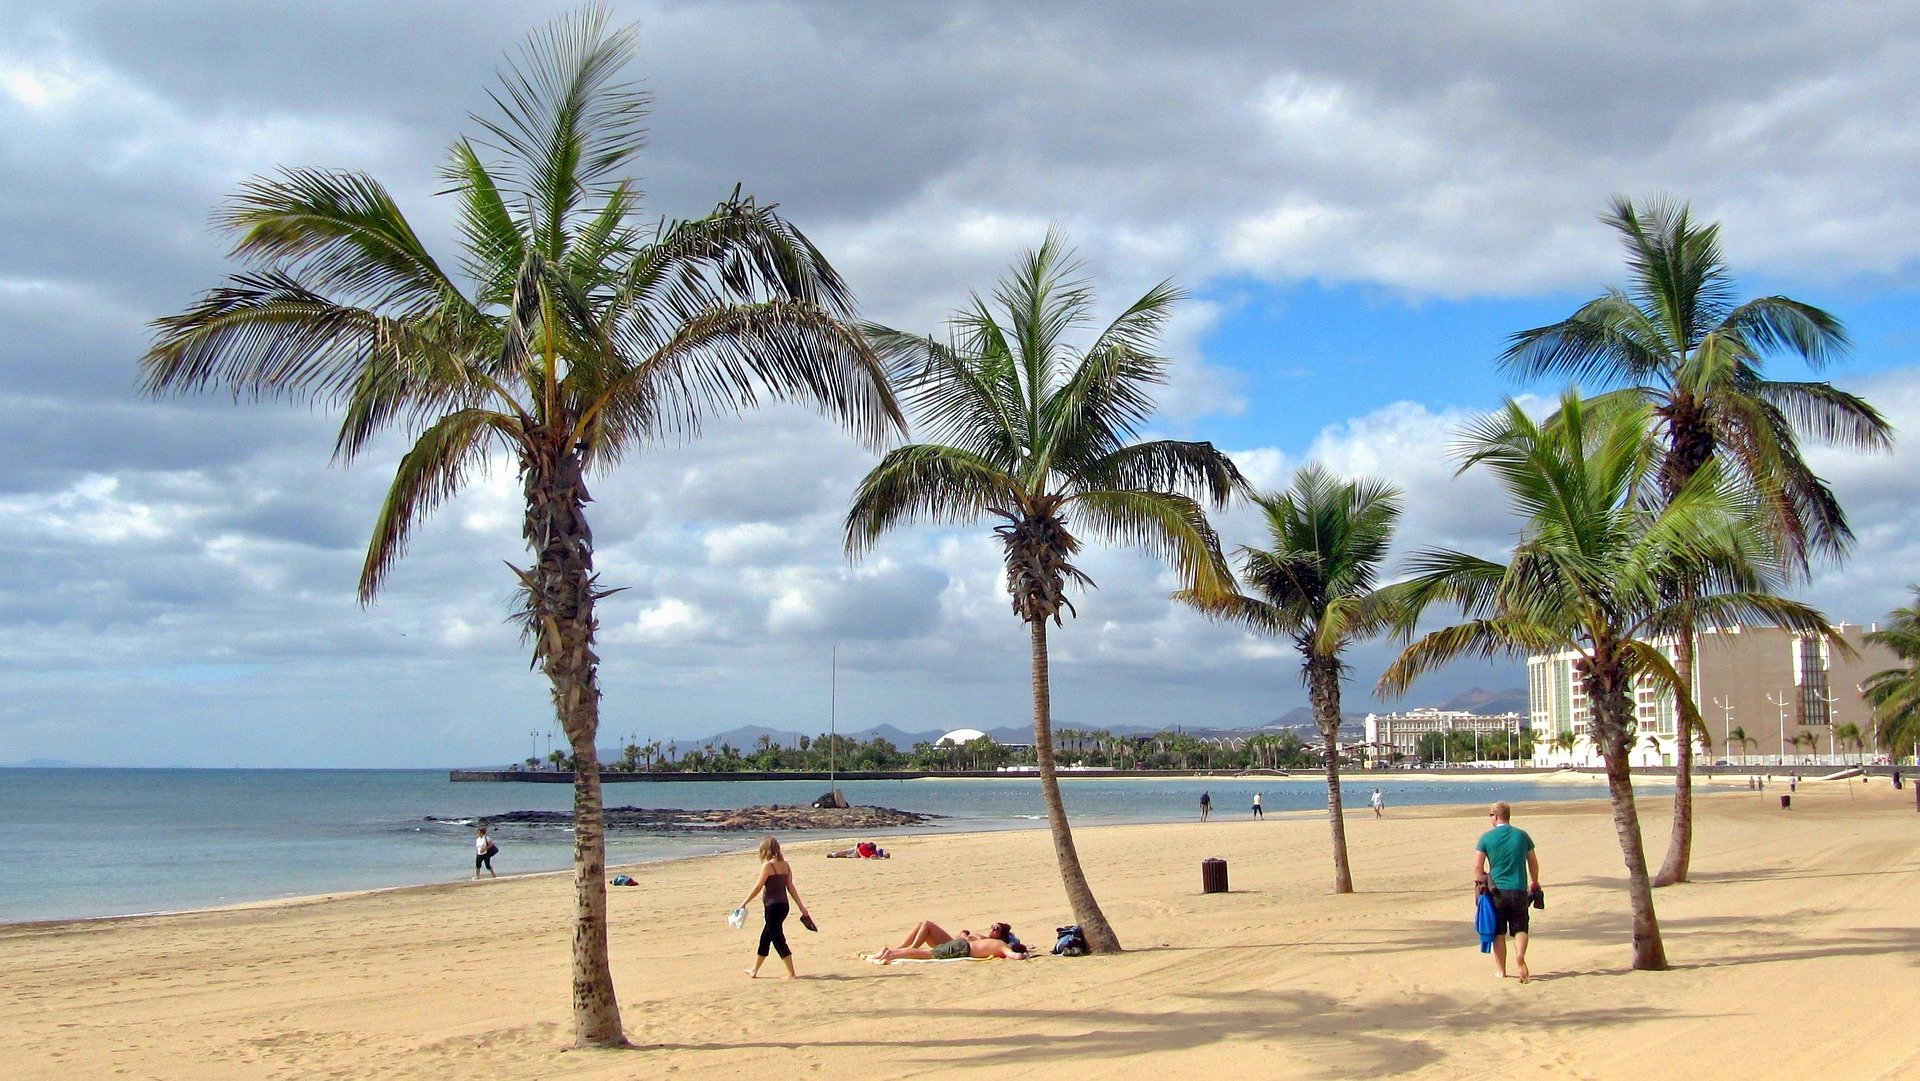 How To Get From Lanzarote Airport To Arrecife - All Possible Ways, cheapest way from Lanzarote airport to Arrecife, Lanzarote airport to Arrecife, Lanzarote airport to Arrecife, Lanzarote airport to Arrecife, Lanzarote Bus Airport, bus from Lanzarote airport to Arrecife, taxi Lanzarote airport to Arrecife, Uber Lanzarote airport to Arrecife, Lanzarote airport to Arrecife by bus, Lanzarote airport to Arrecife, Lanzarote to Arrecife, Titsa bus fare Lanzarote airport to Arrecife